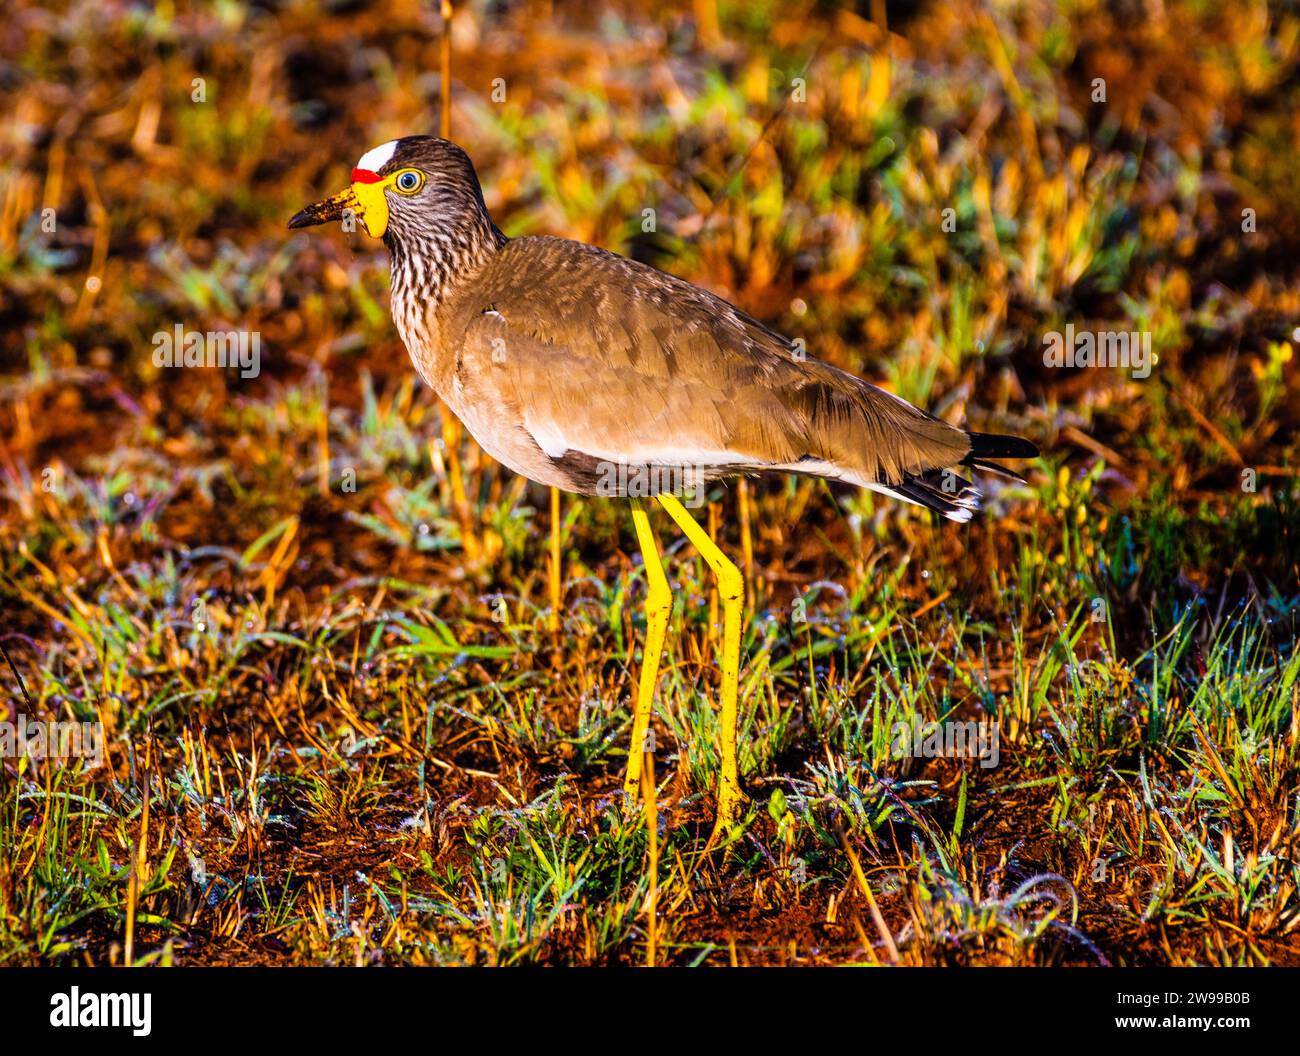 A small bird is foraging for food on the lush green grass in a sunny outdoor setting Stock Photo